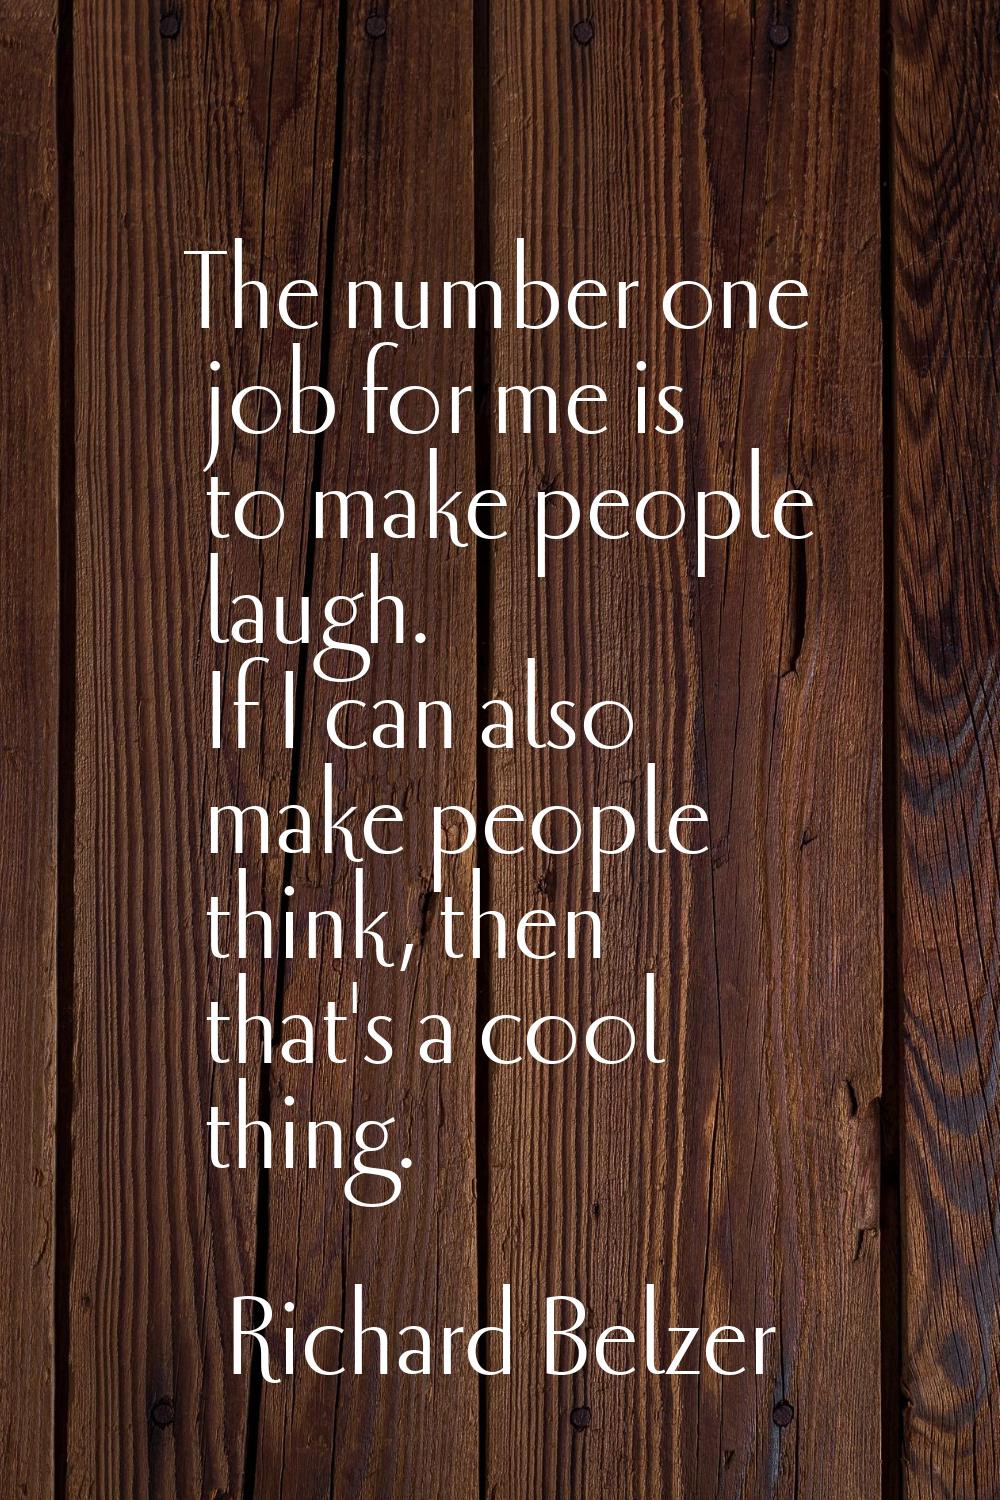 The number one job for me is to make people laugh. If I can also make people think, then that's a c